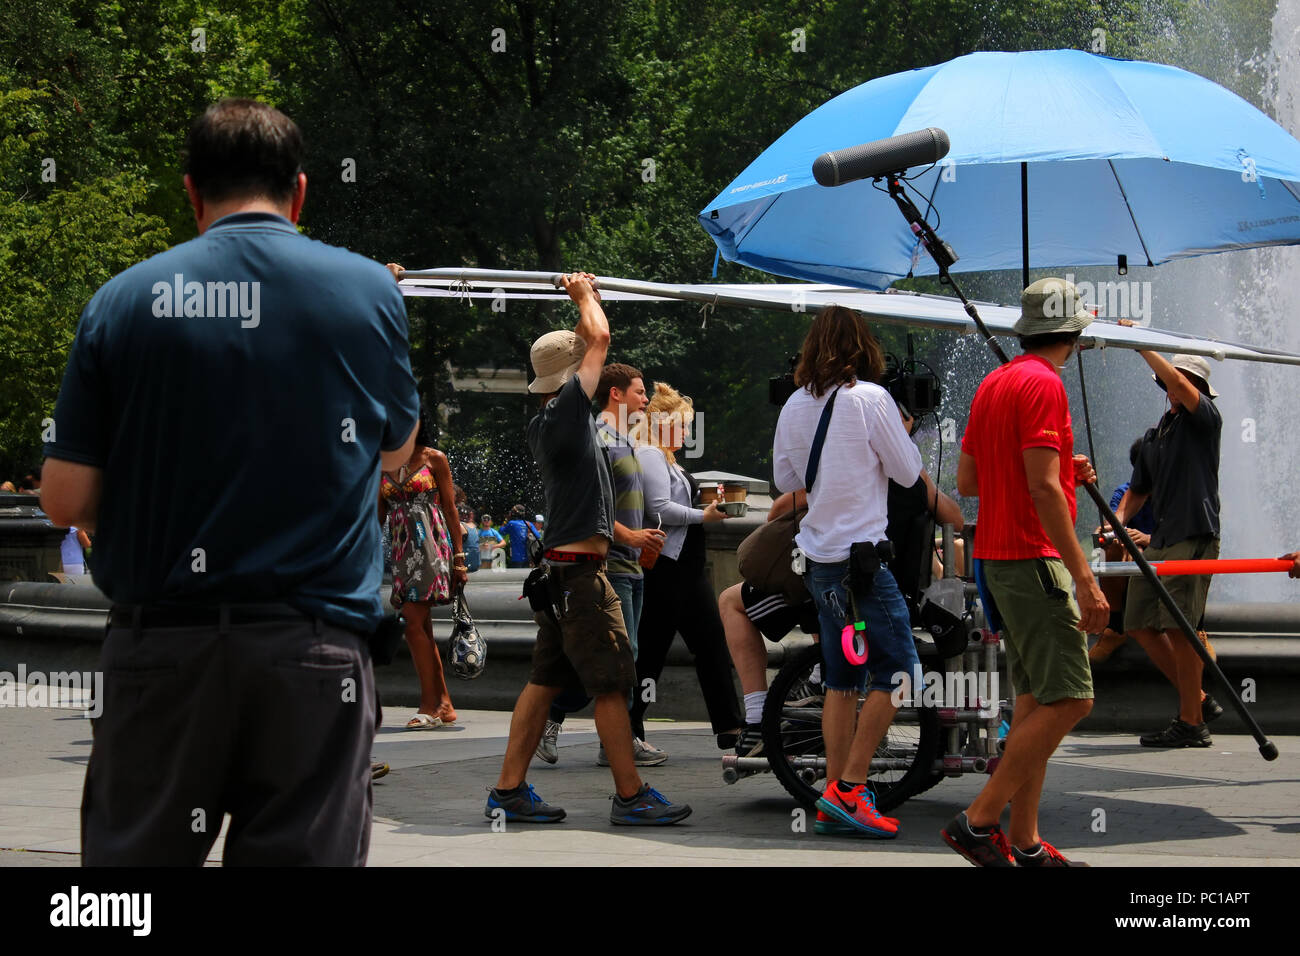 NEW YORK, NY - JULY 11: Movie set and crew of Isn't It Romantic as it was filmed in Washington Square Park in Manhattan on JULY 11th, 2017 in New York Stock Photo